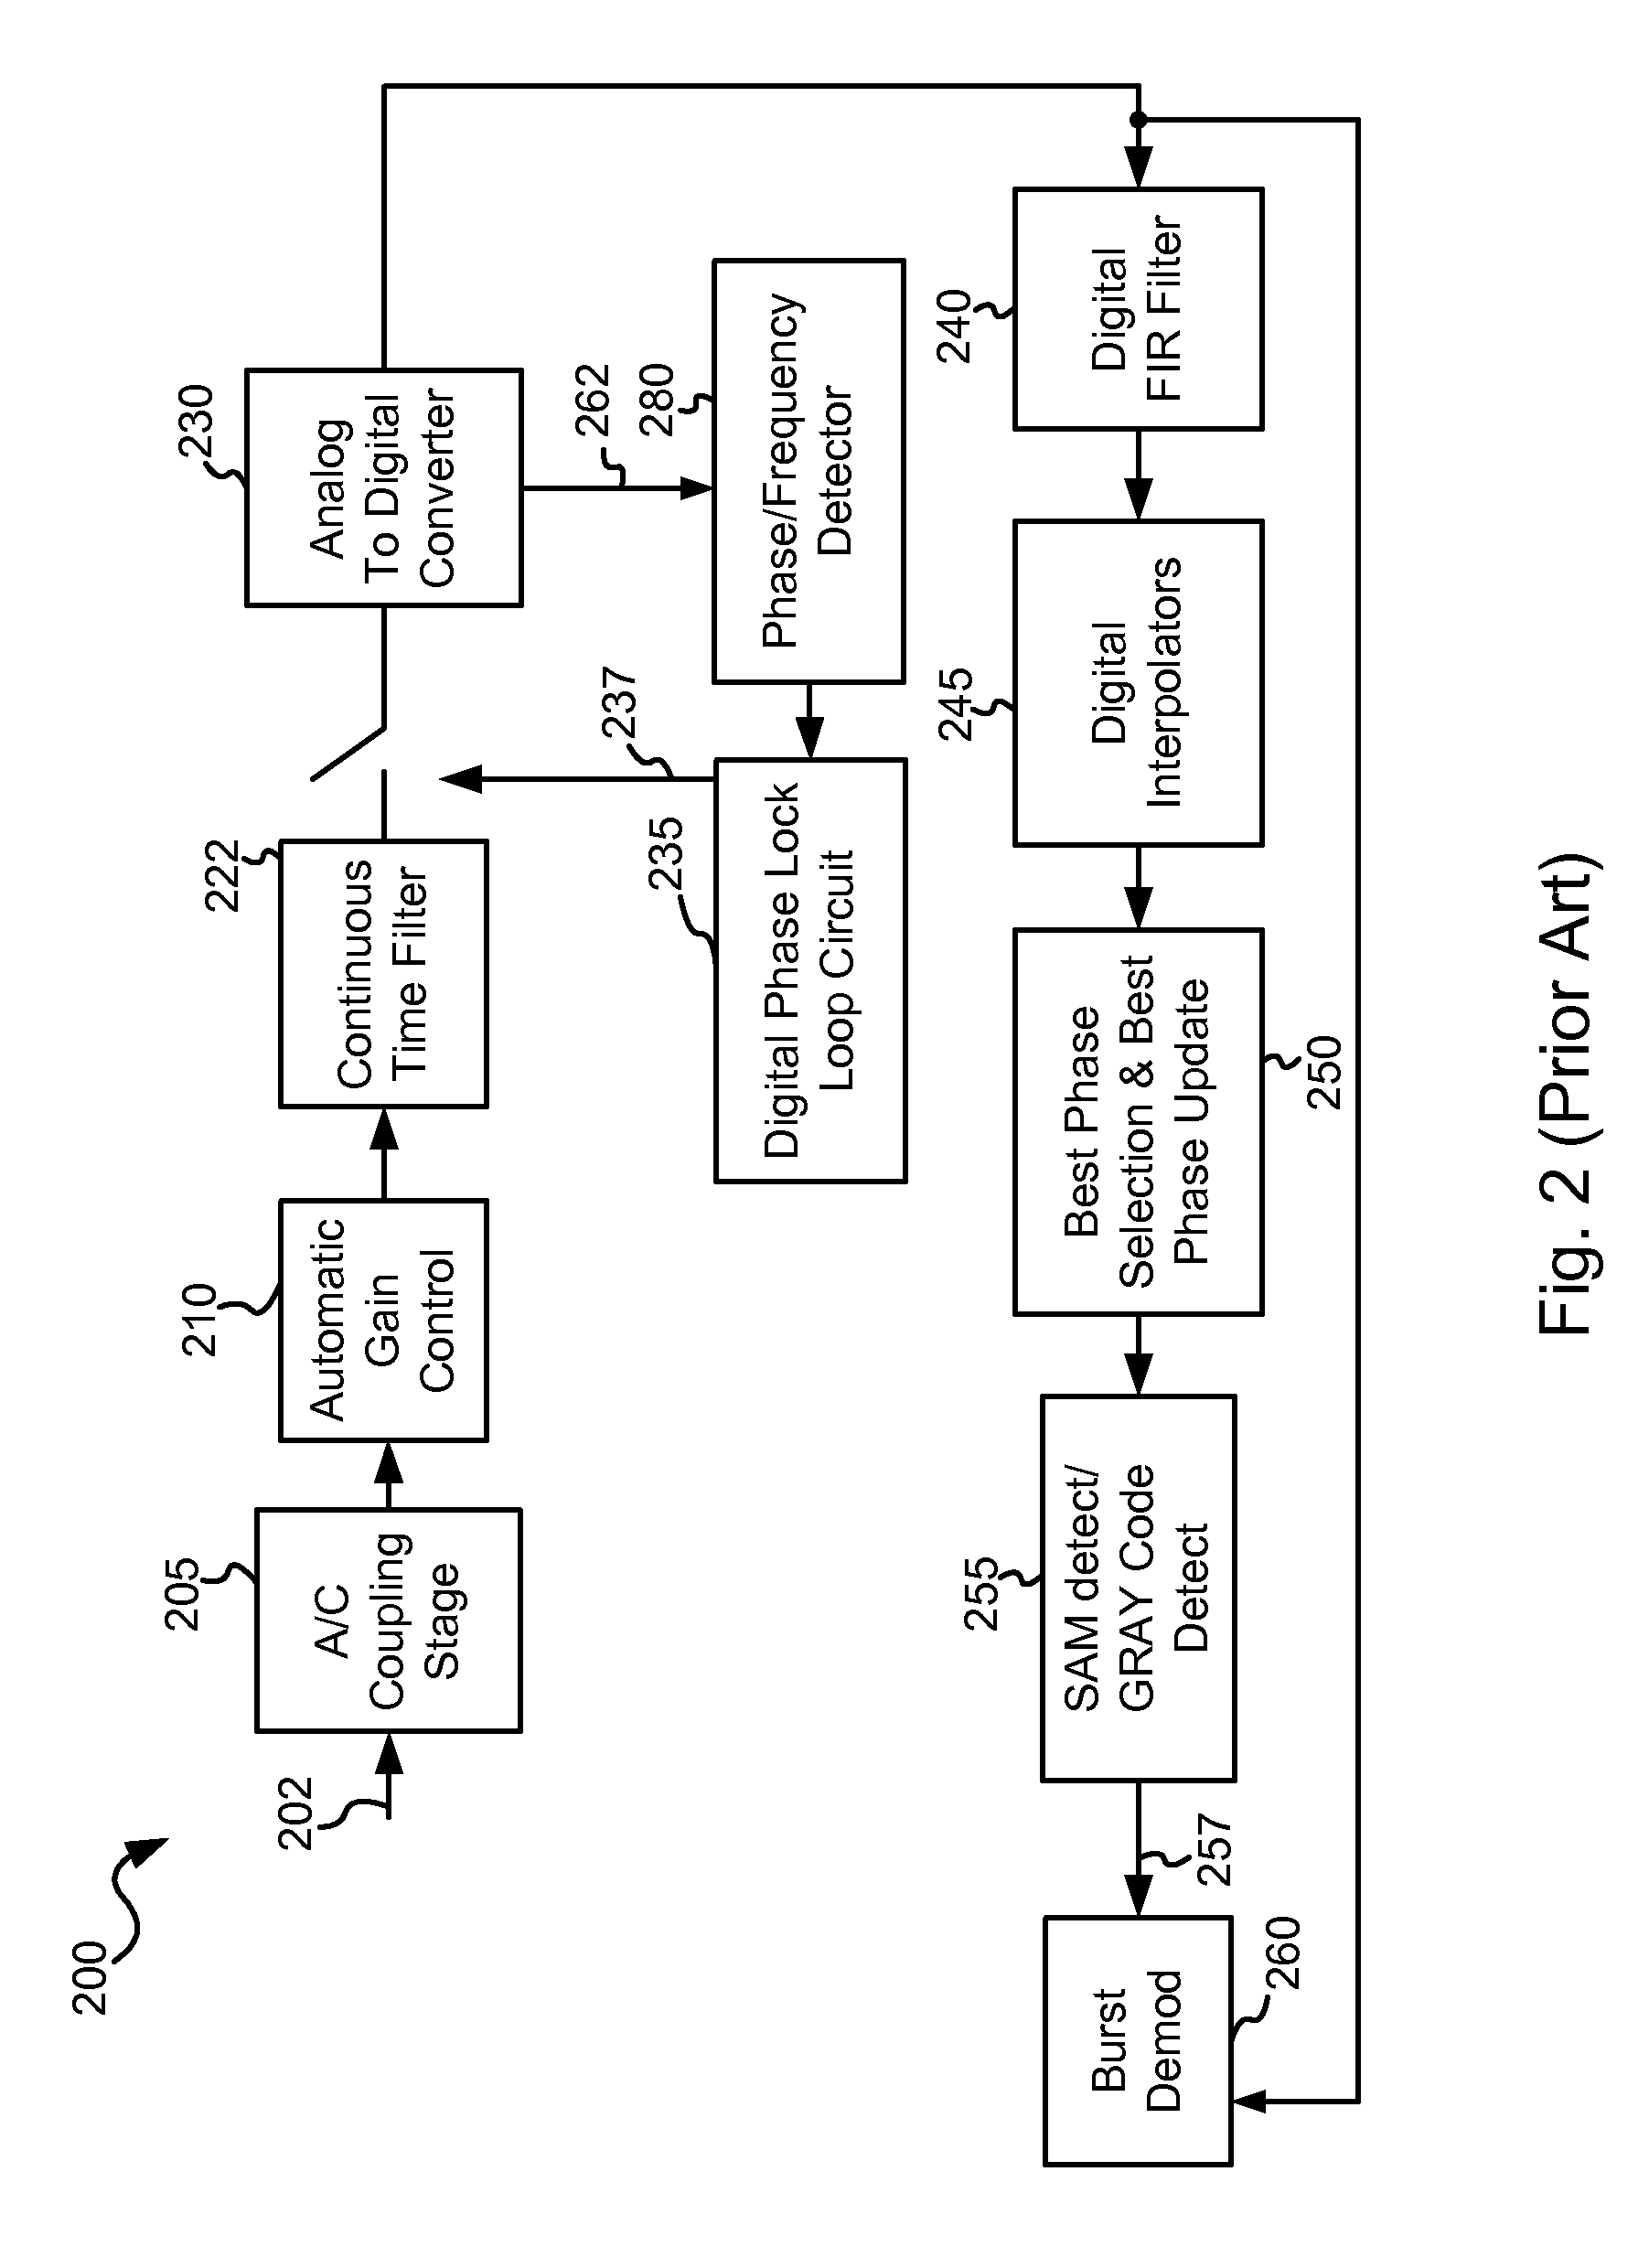 Systems and methods for acquiring modified rate burst demodulation in servo systems